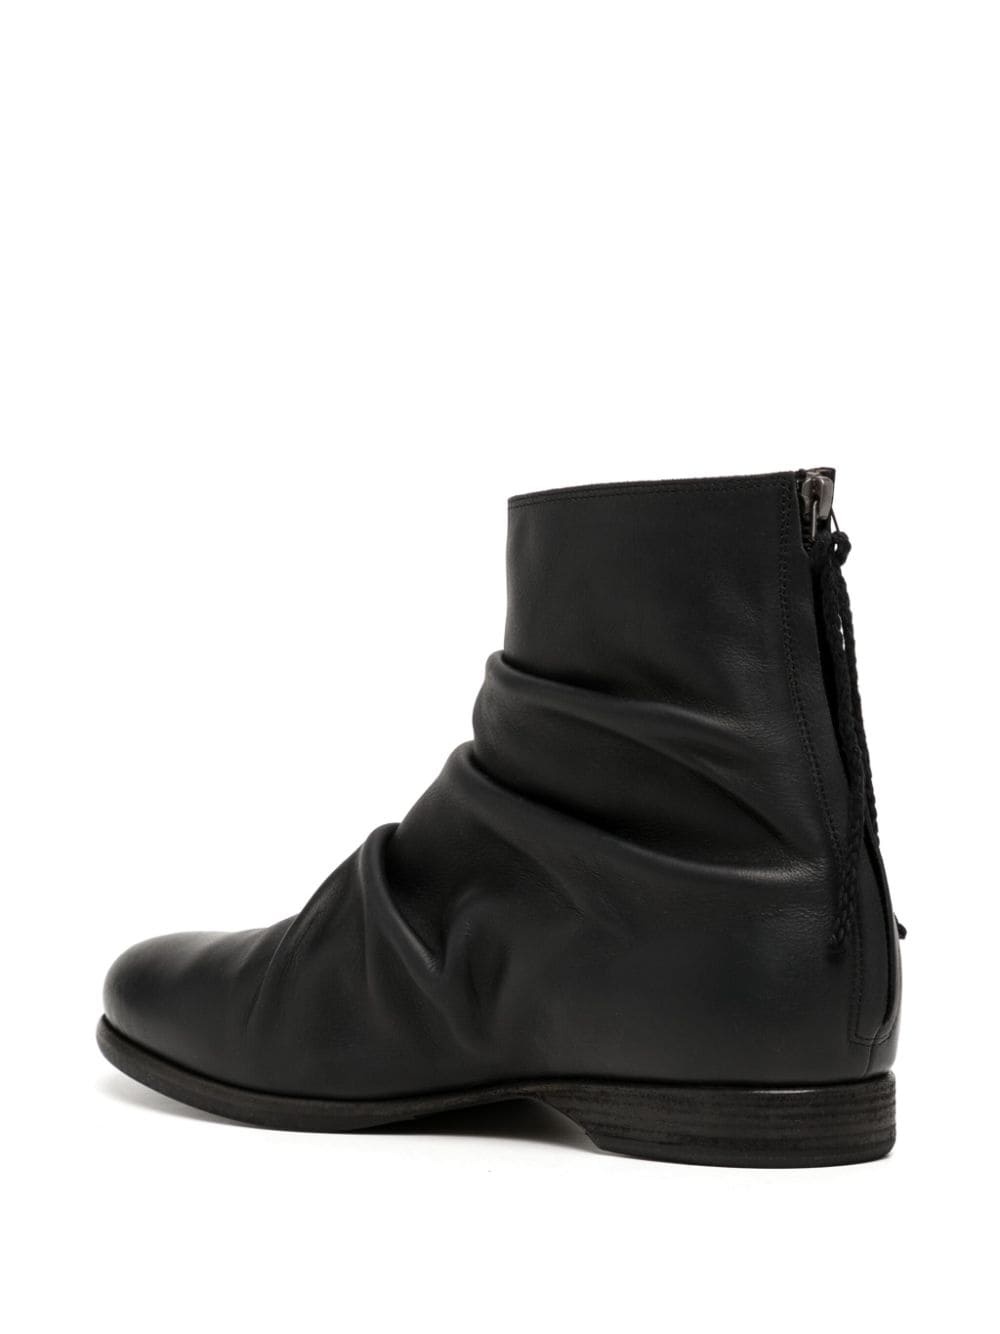 pleat-detail leather boots - 3